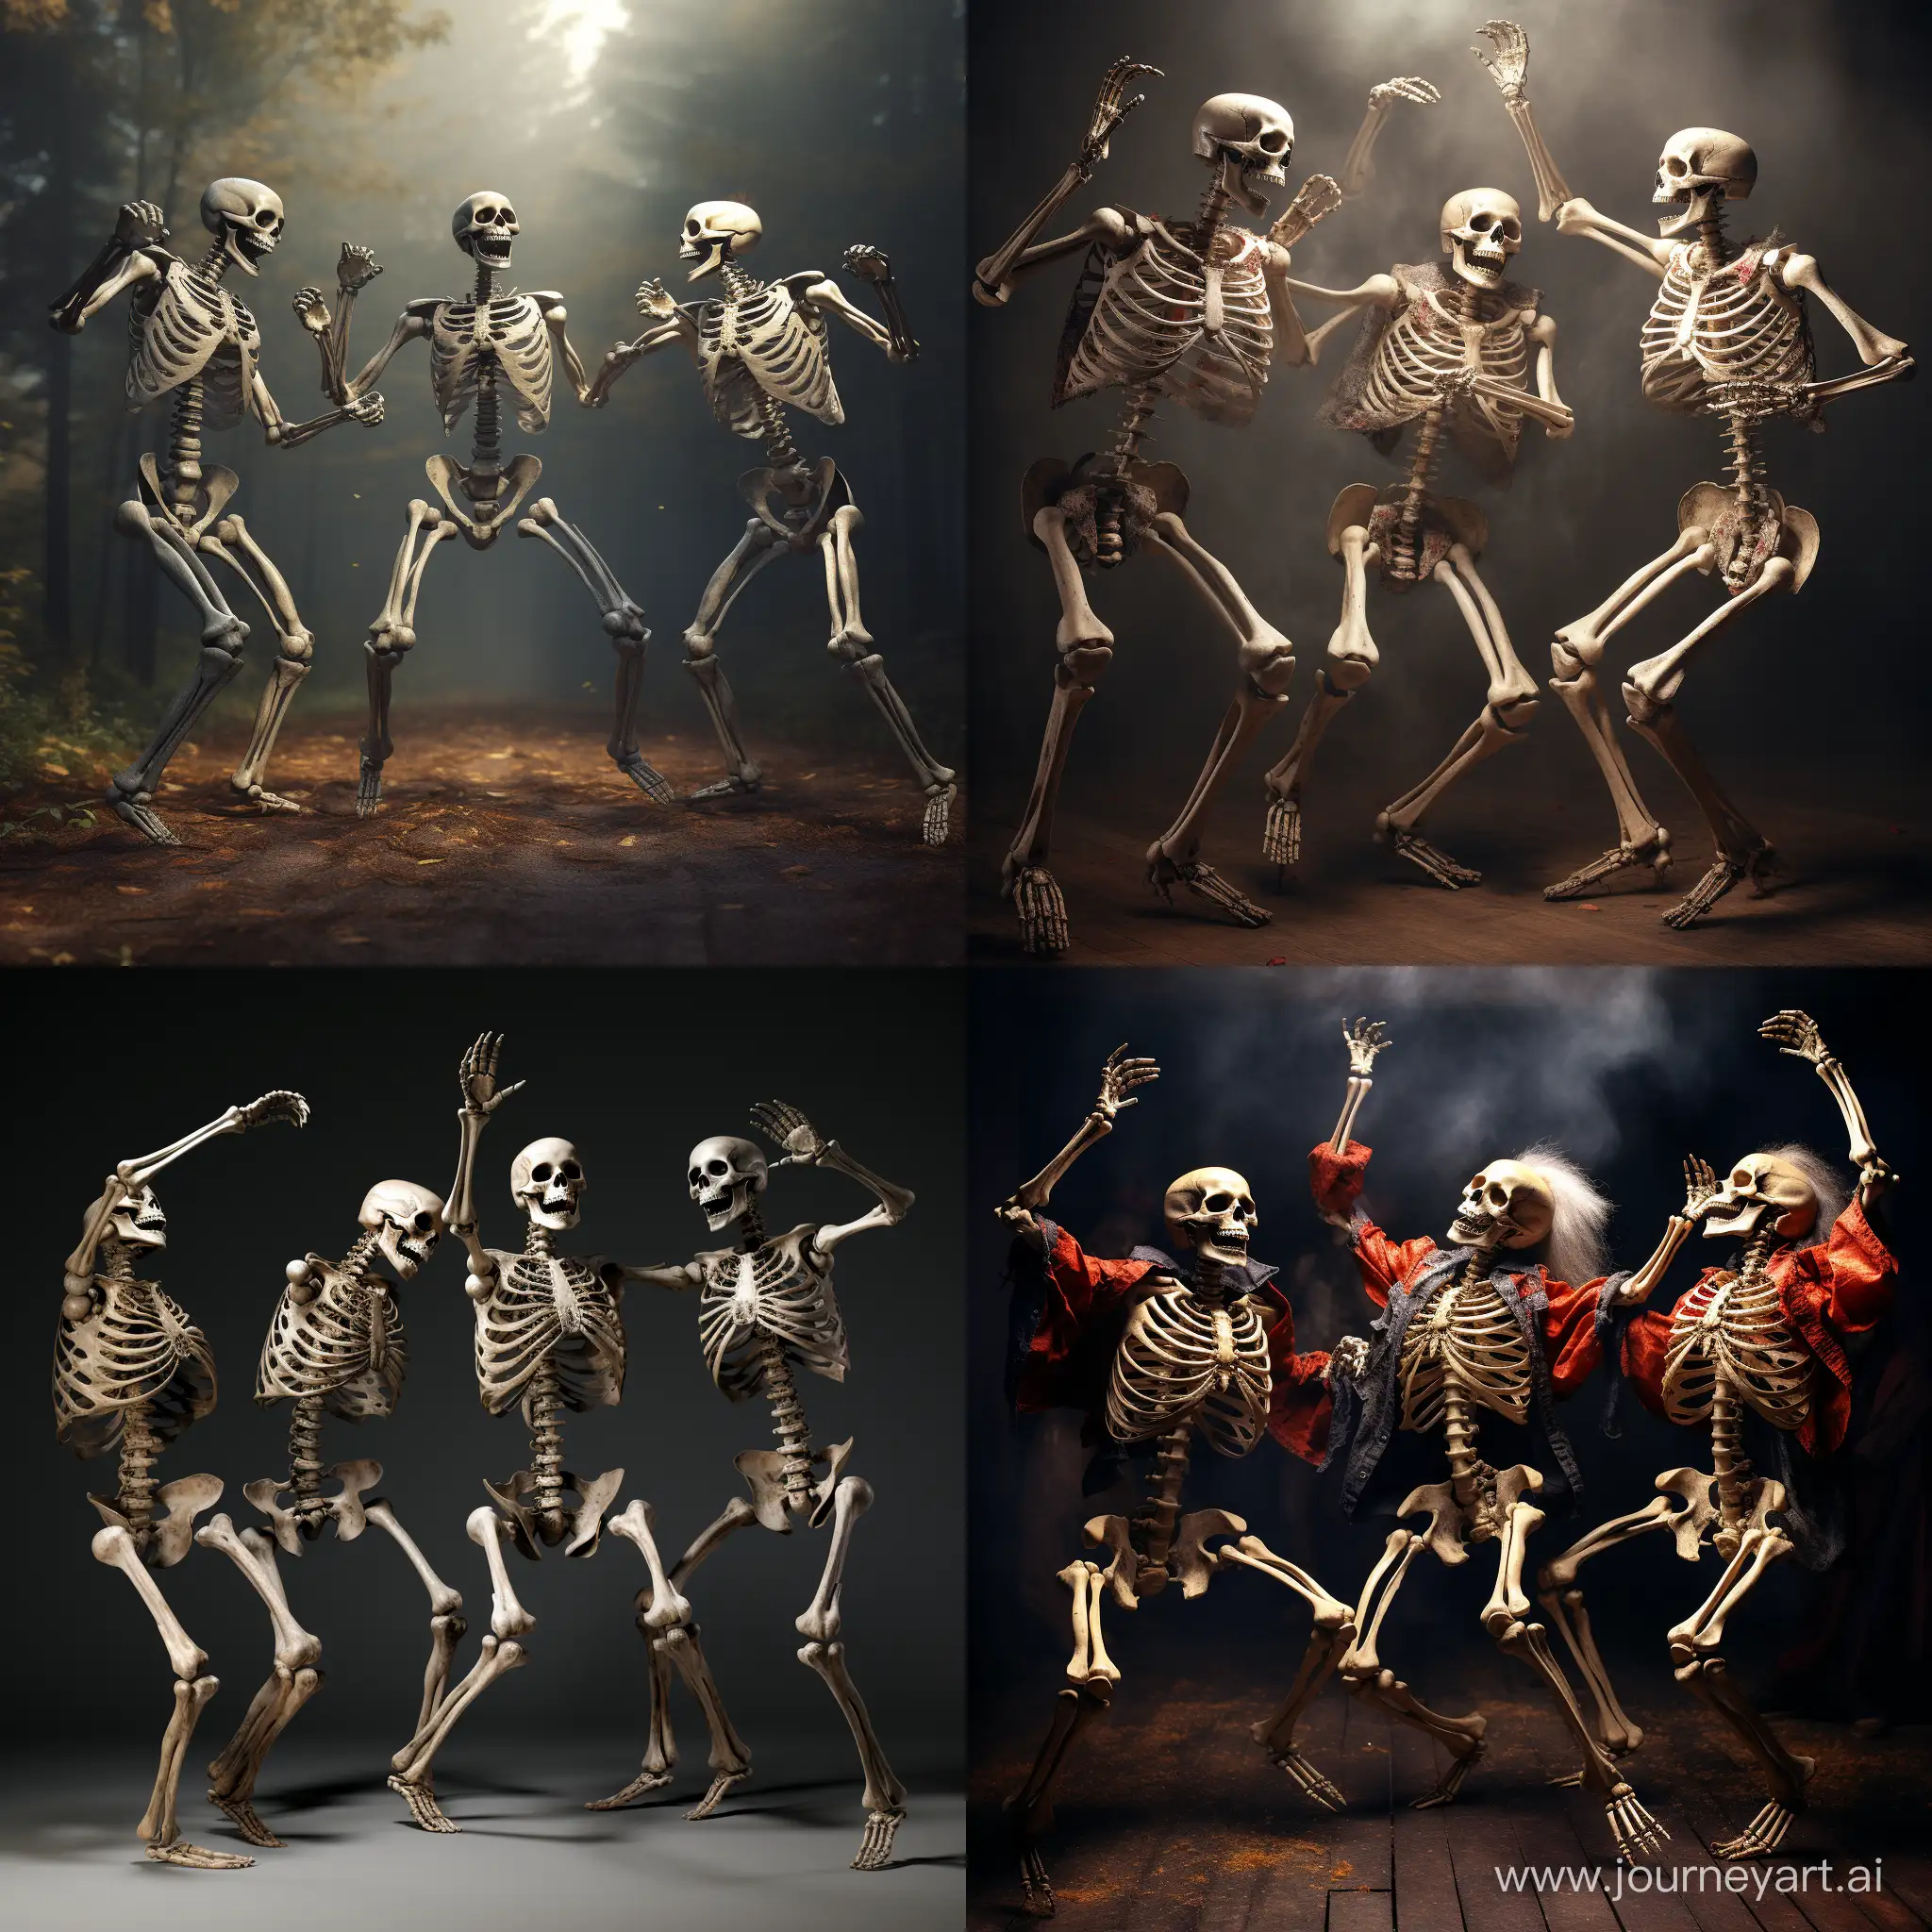 Ethereal-Dance-of-Three-Skeletons-in-Monochrome-Harmony